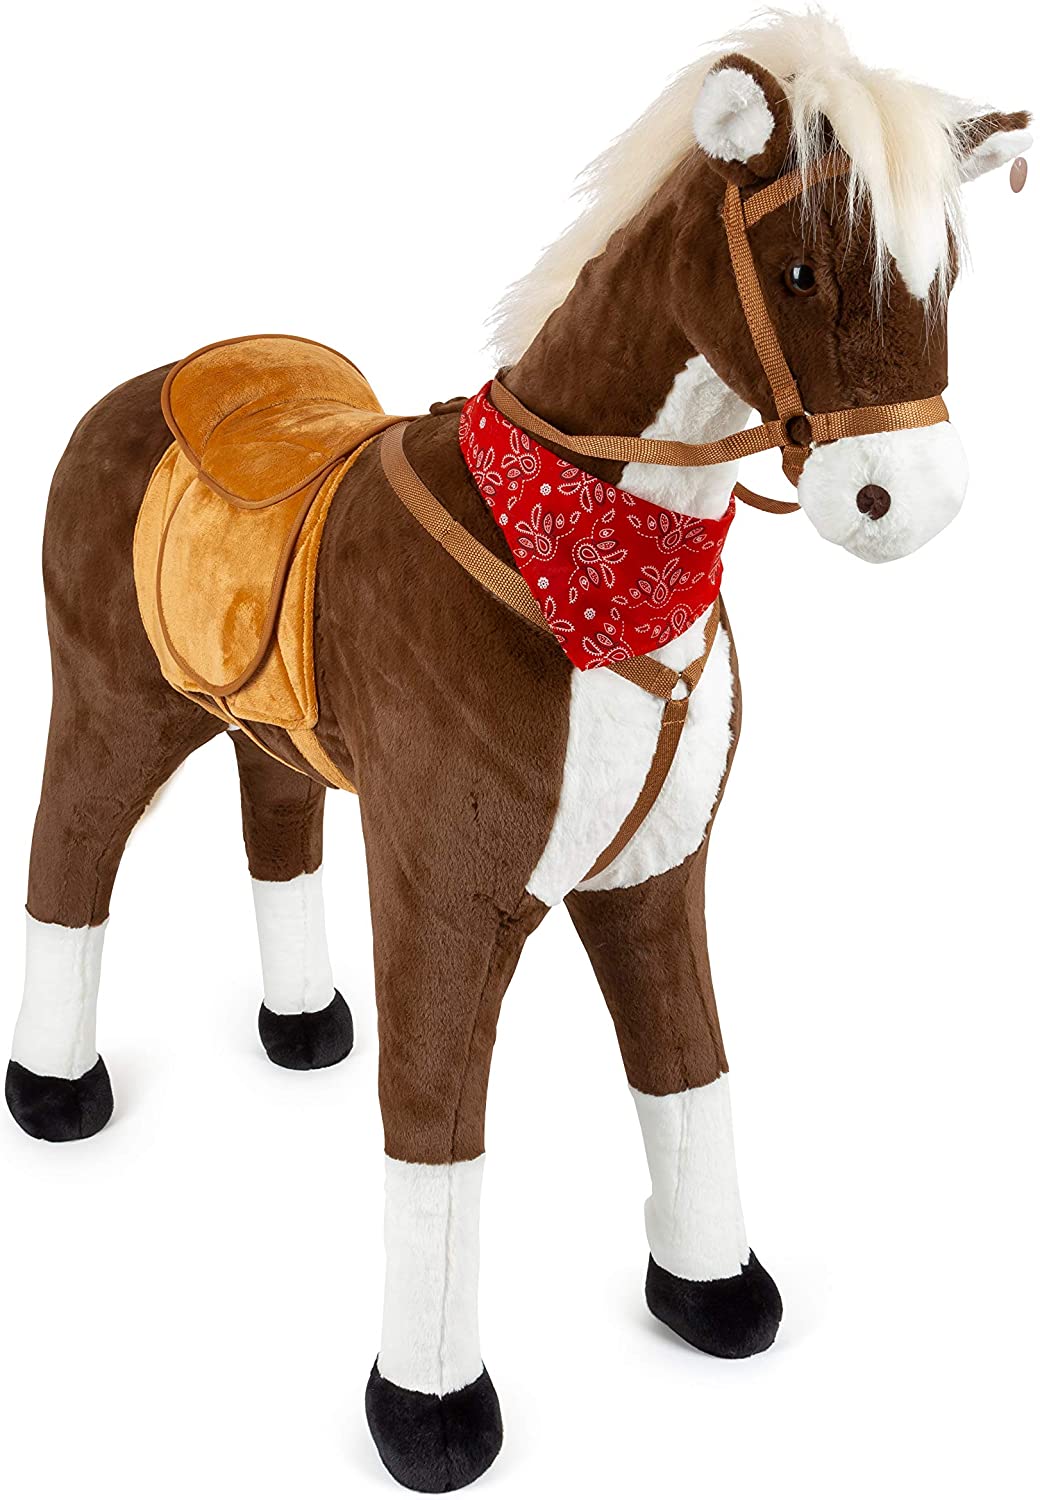 Small Foot 11179 Brown Riding Horse \"Flamme\" with Removable Saddle, Neckerchief and Sound Effects from 5 Years